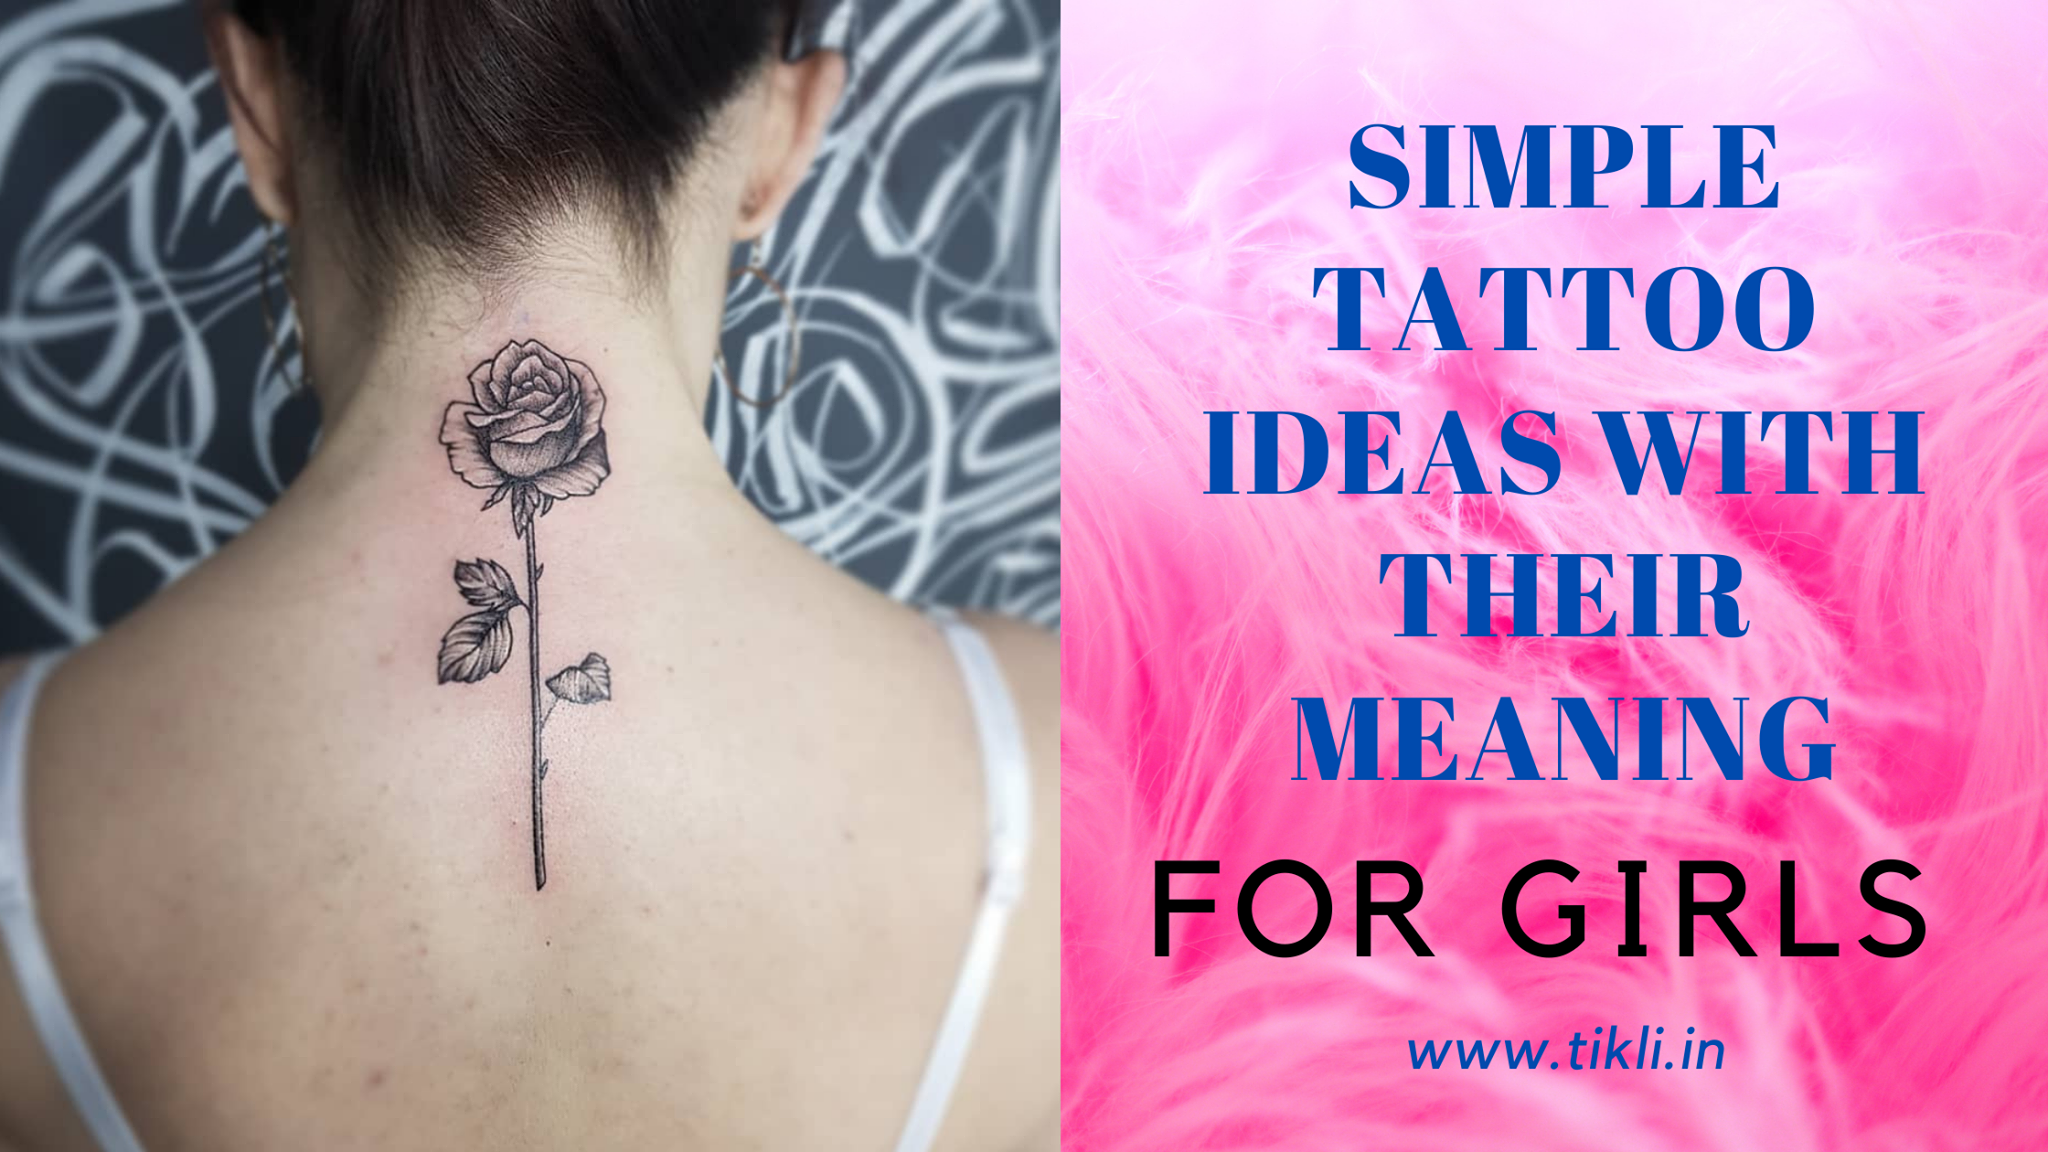 Simple Tattoos Idea for Girls and Their Meaning - Tikli